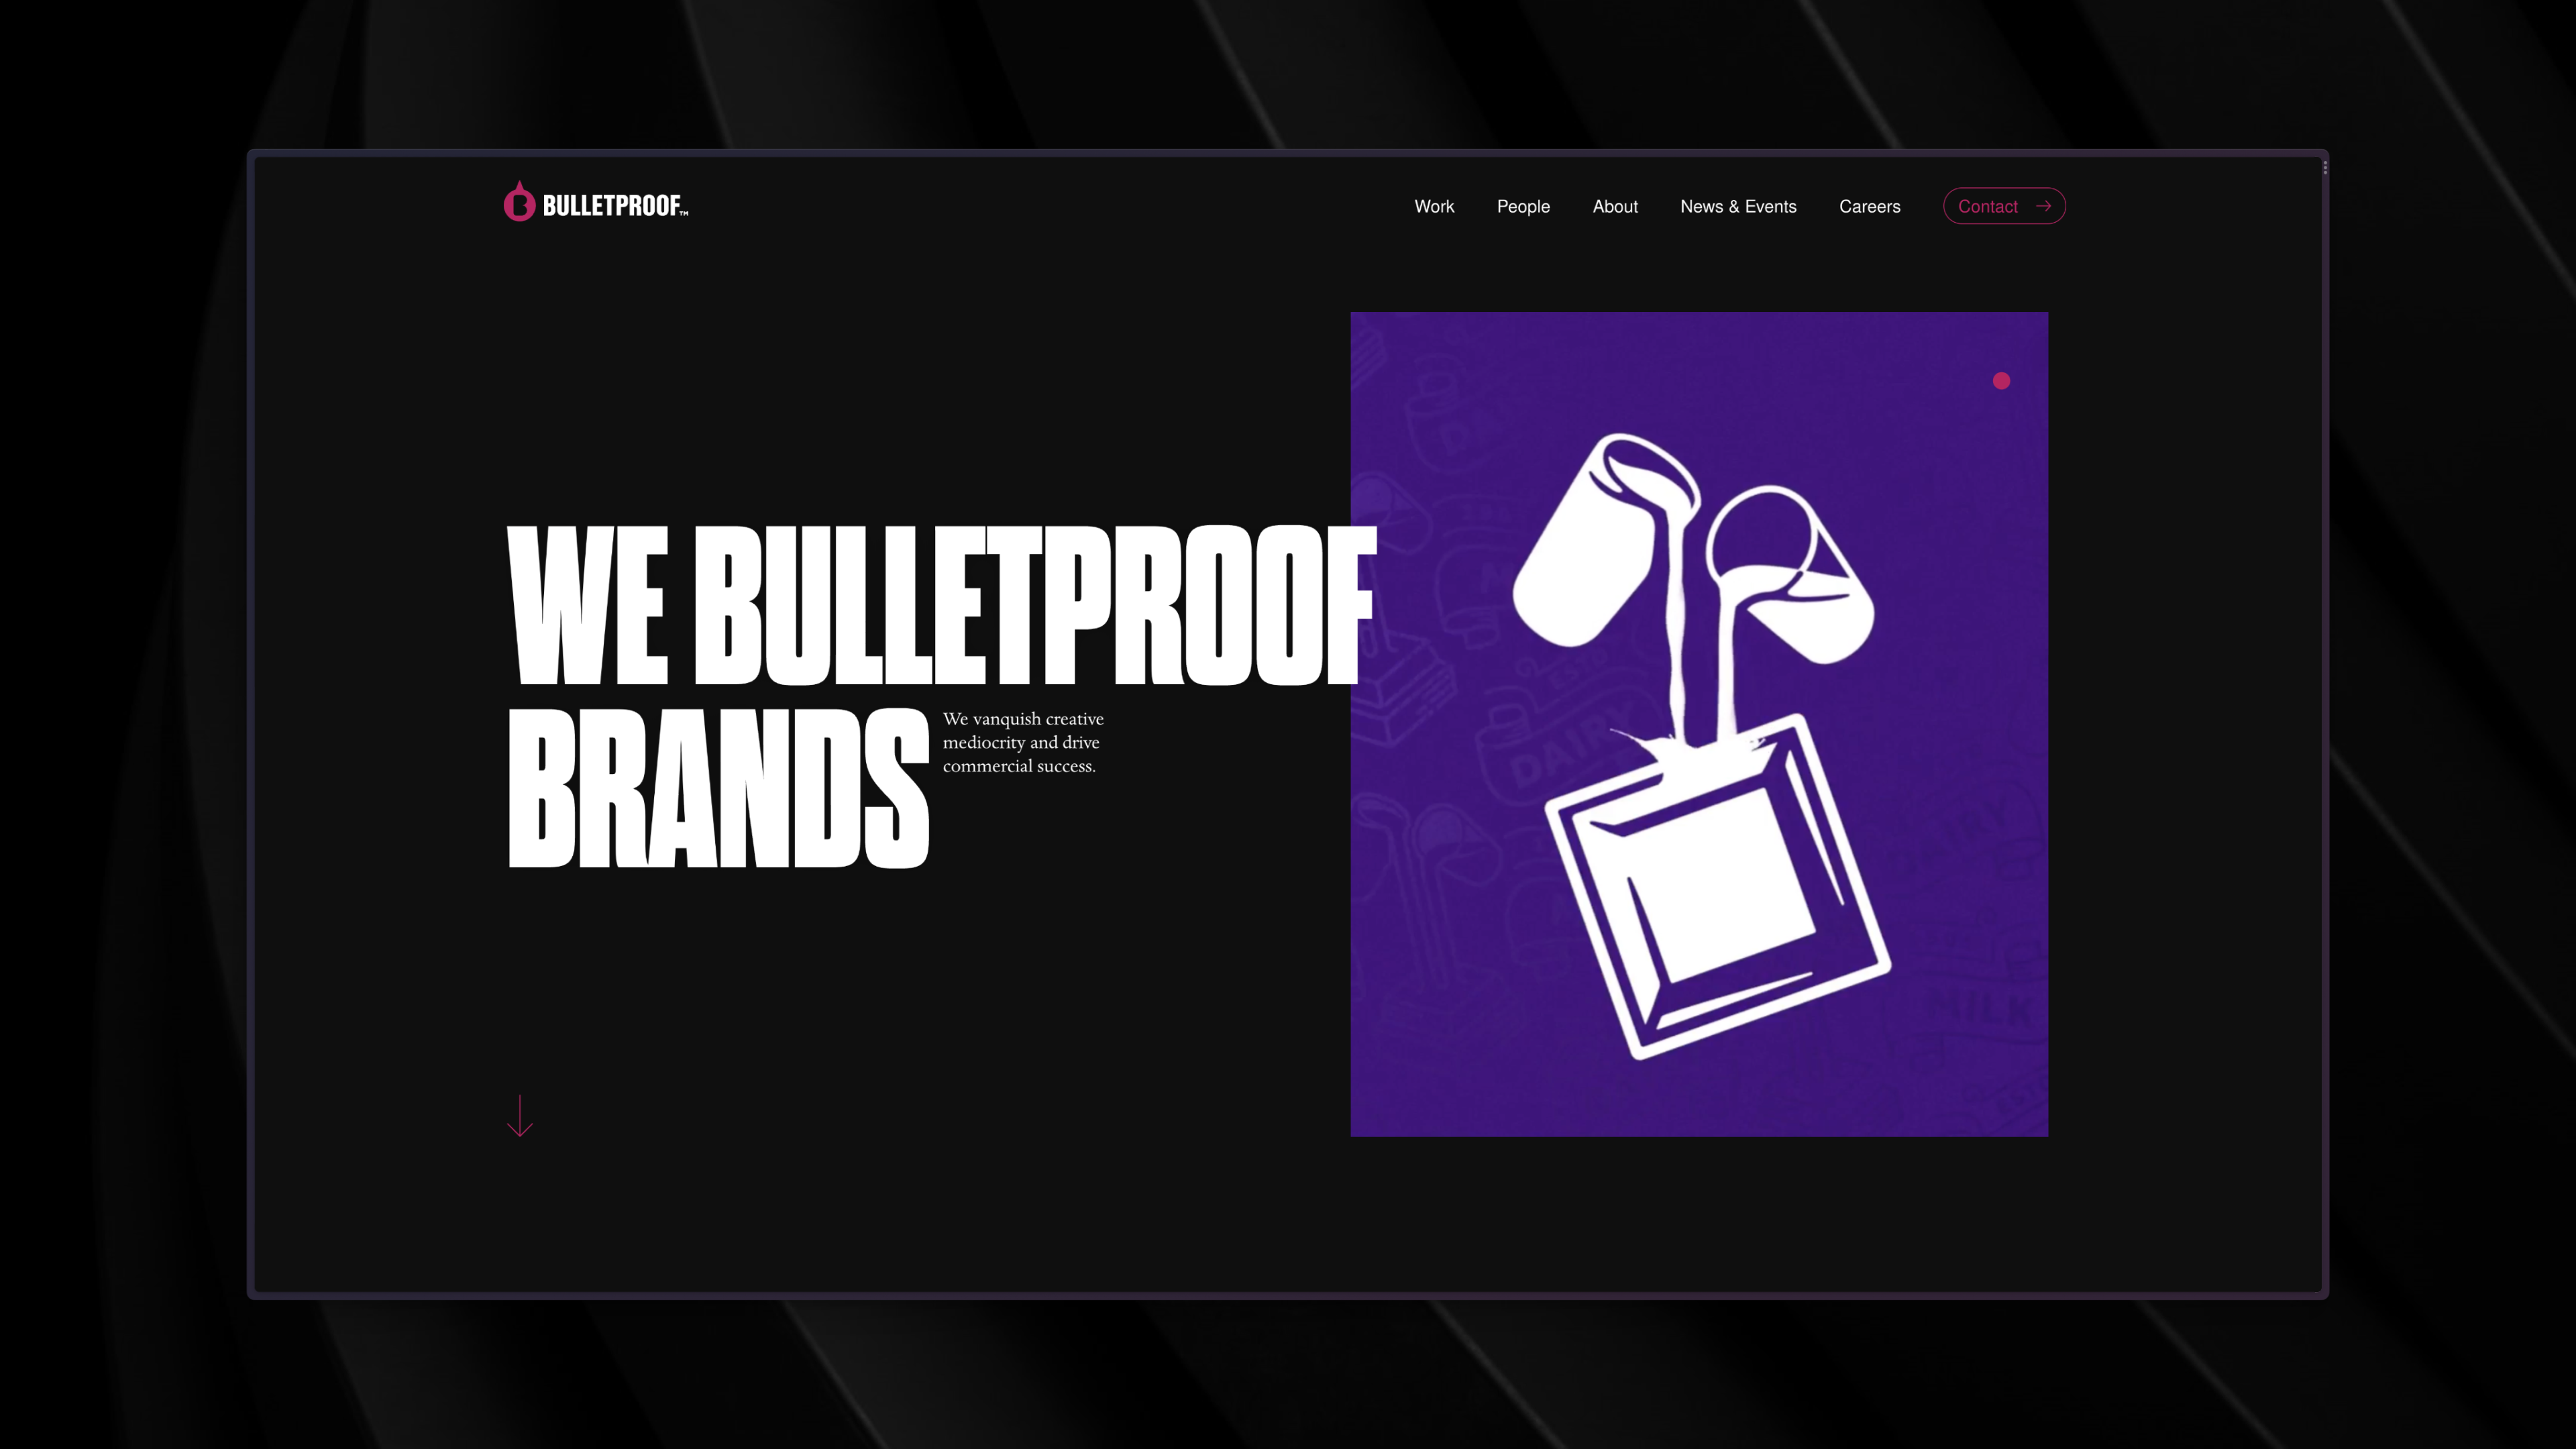 Bulletproof homepage with a video reel of their clients